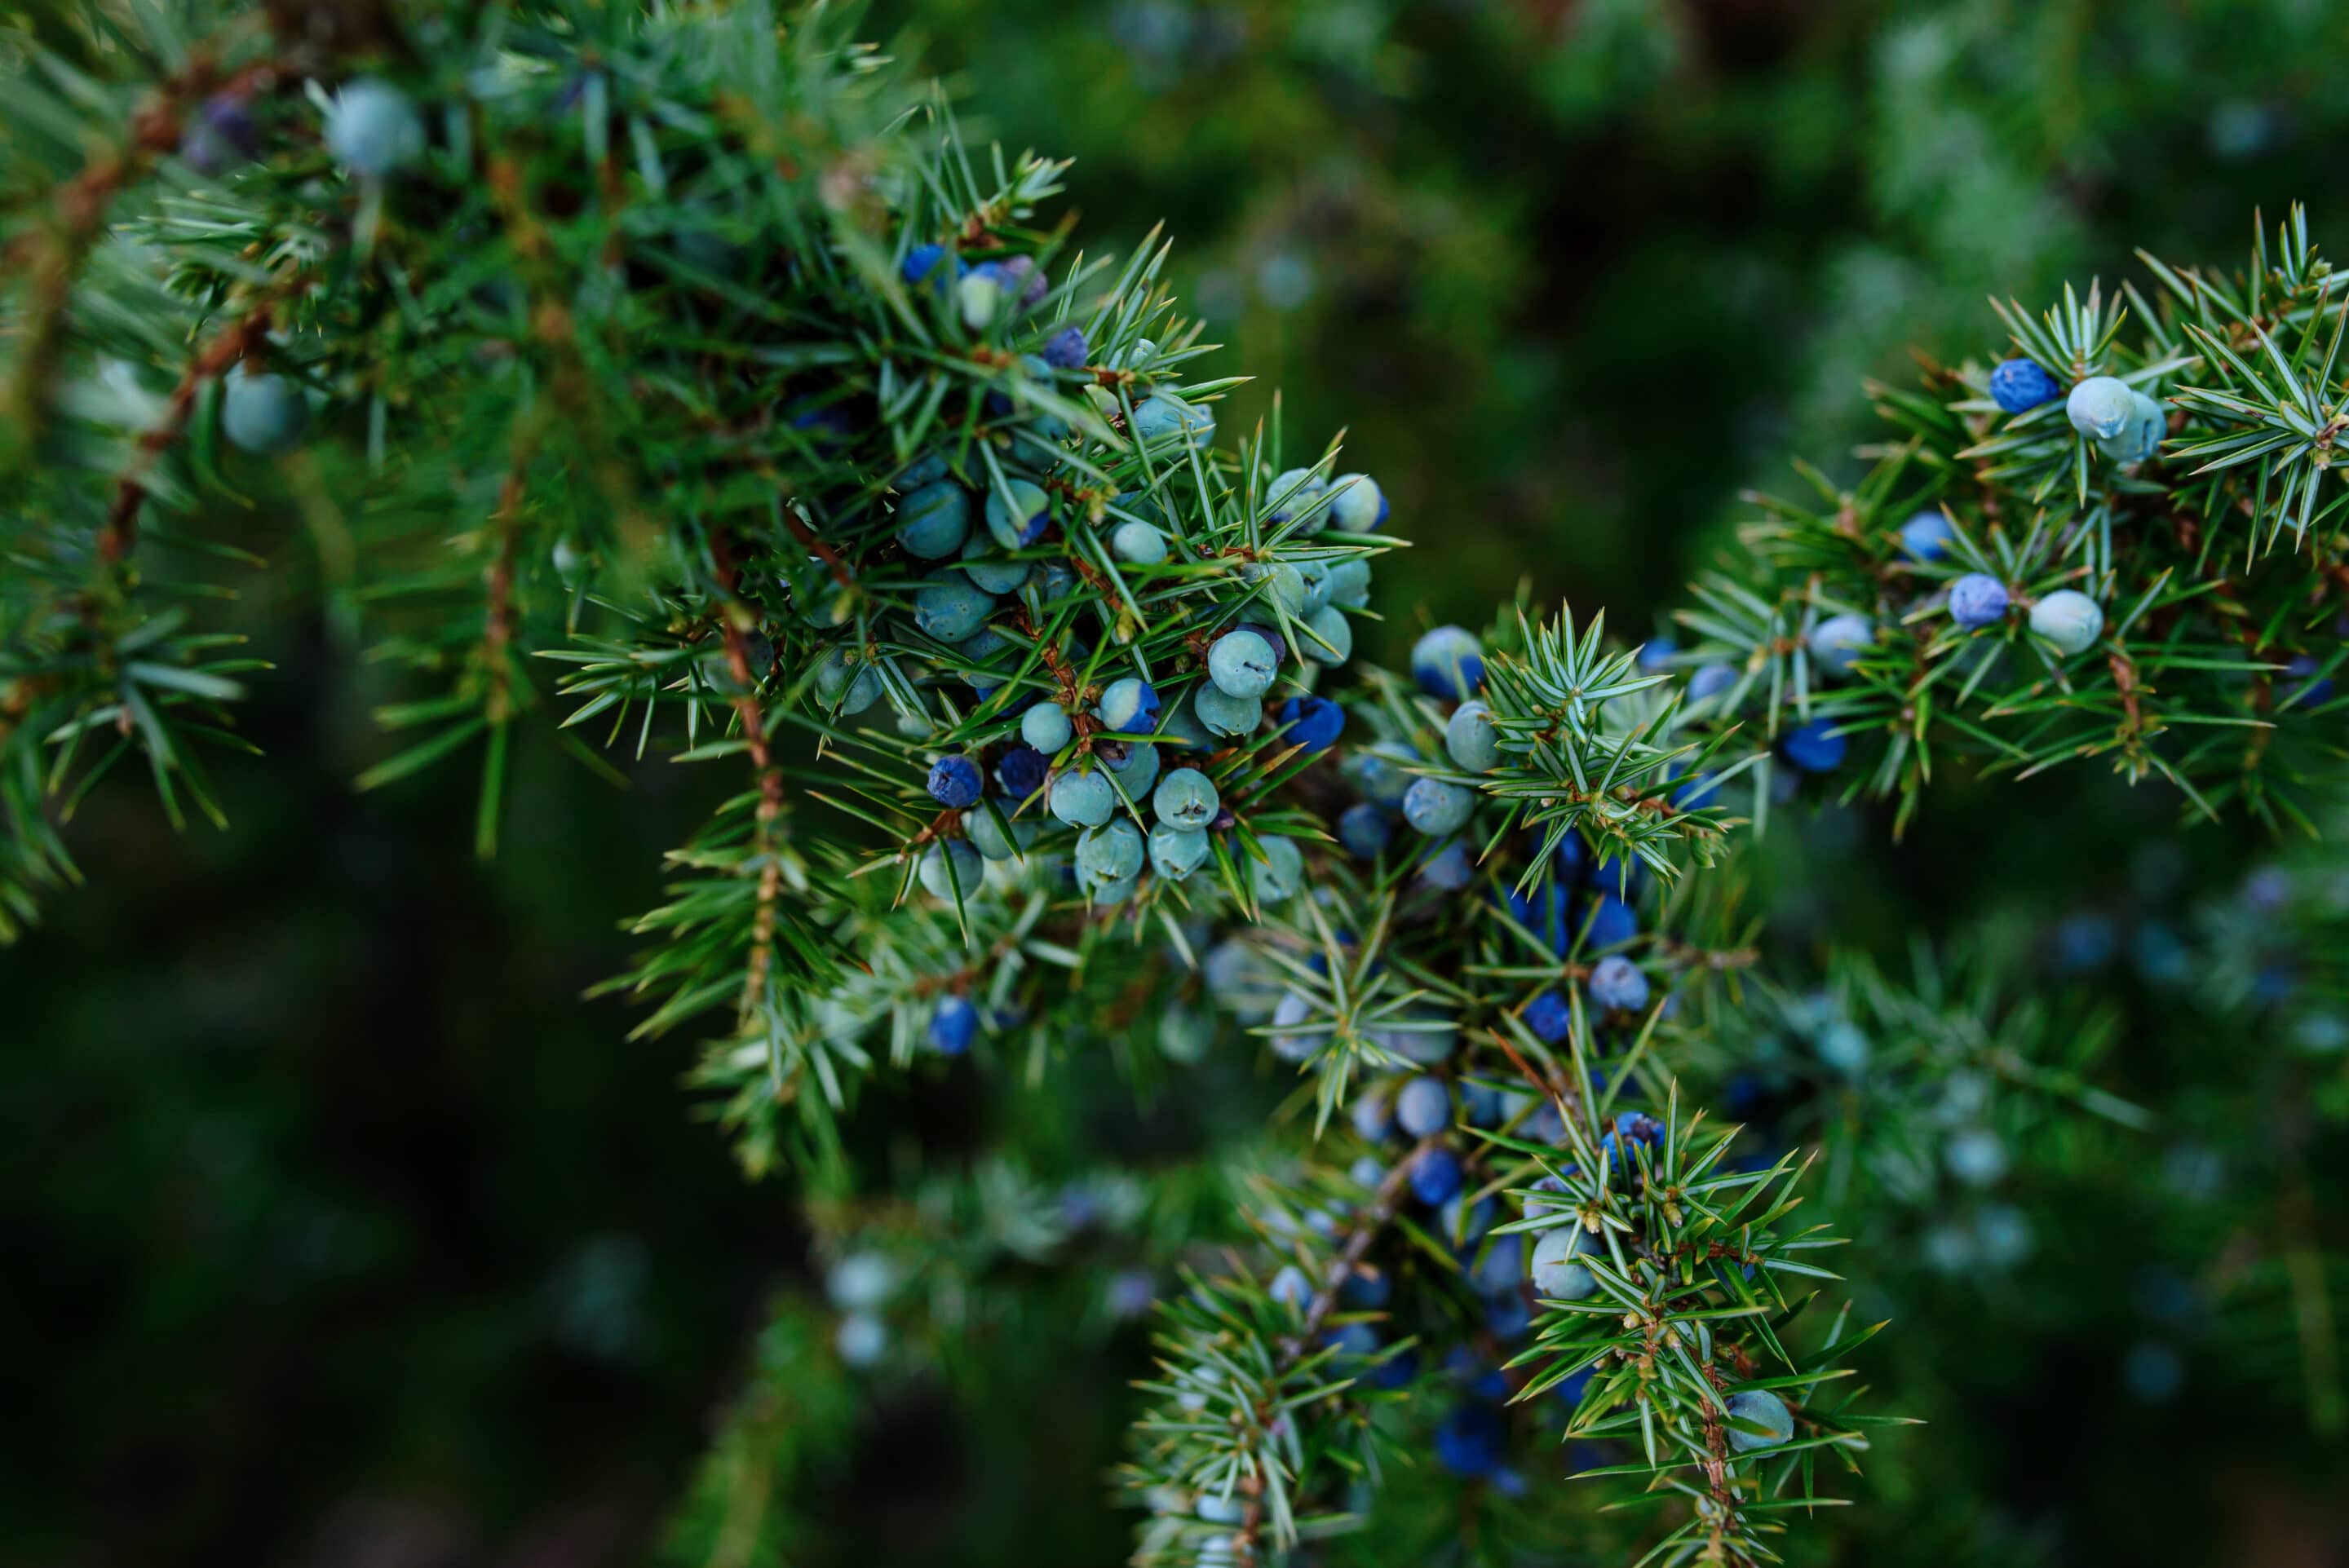 Did you know that Juniper berries are responsible for giving gin its distinctive flavor?